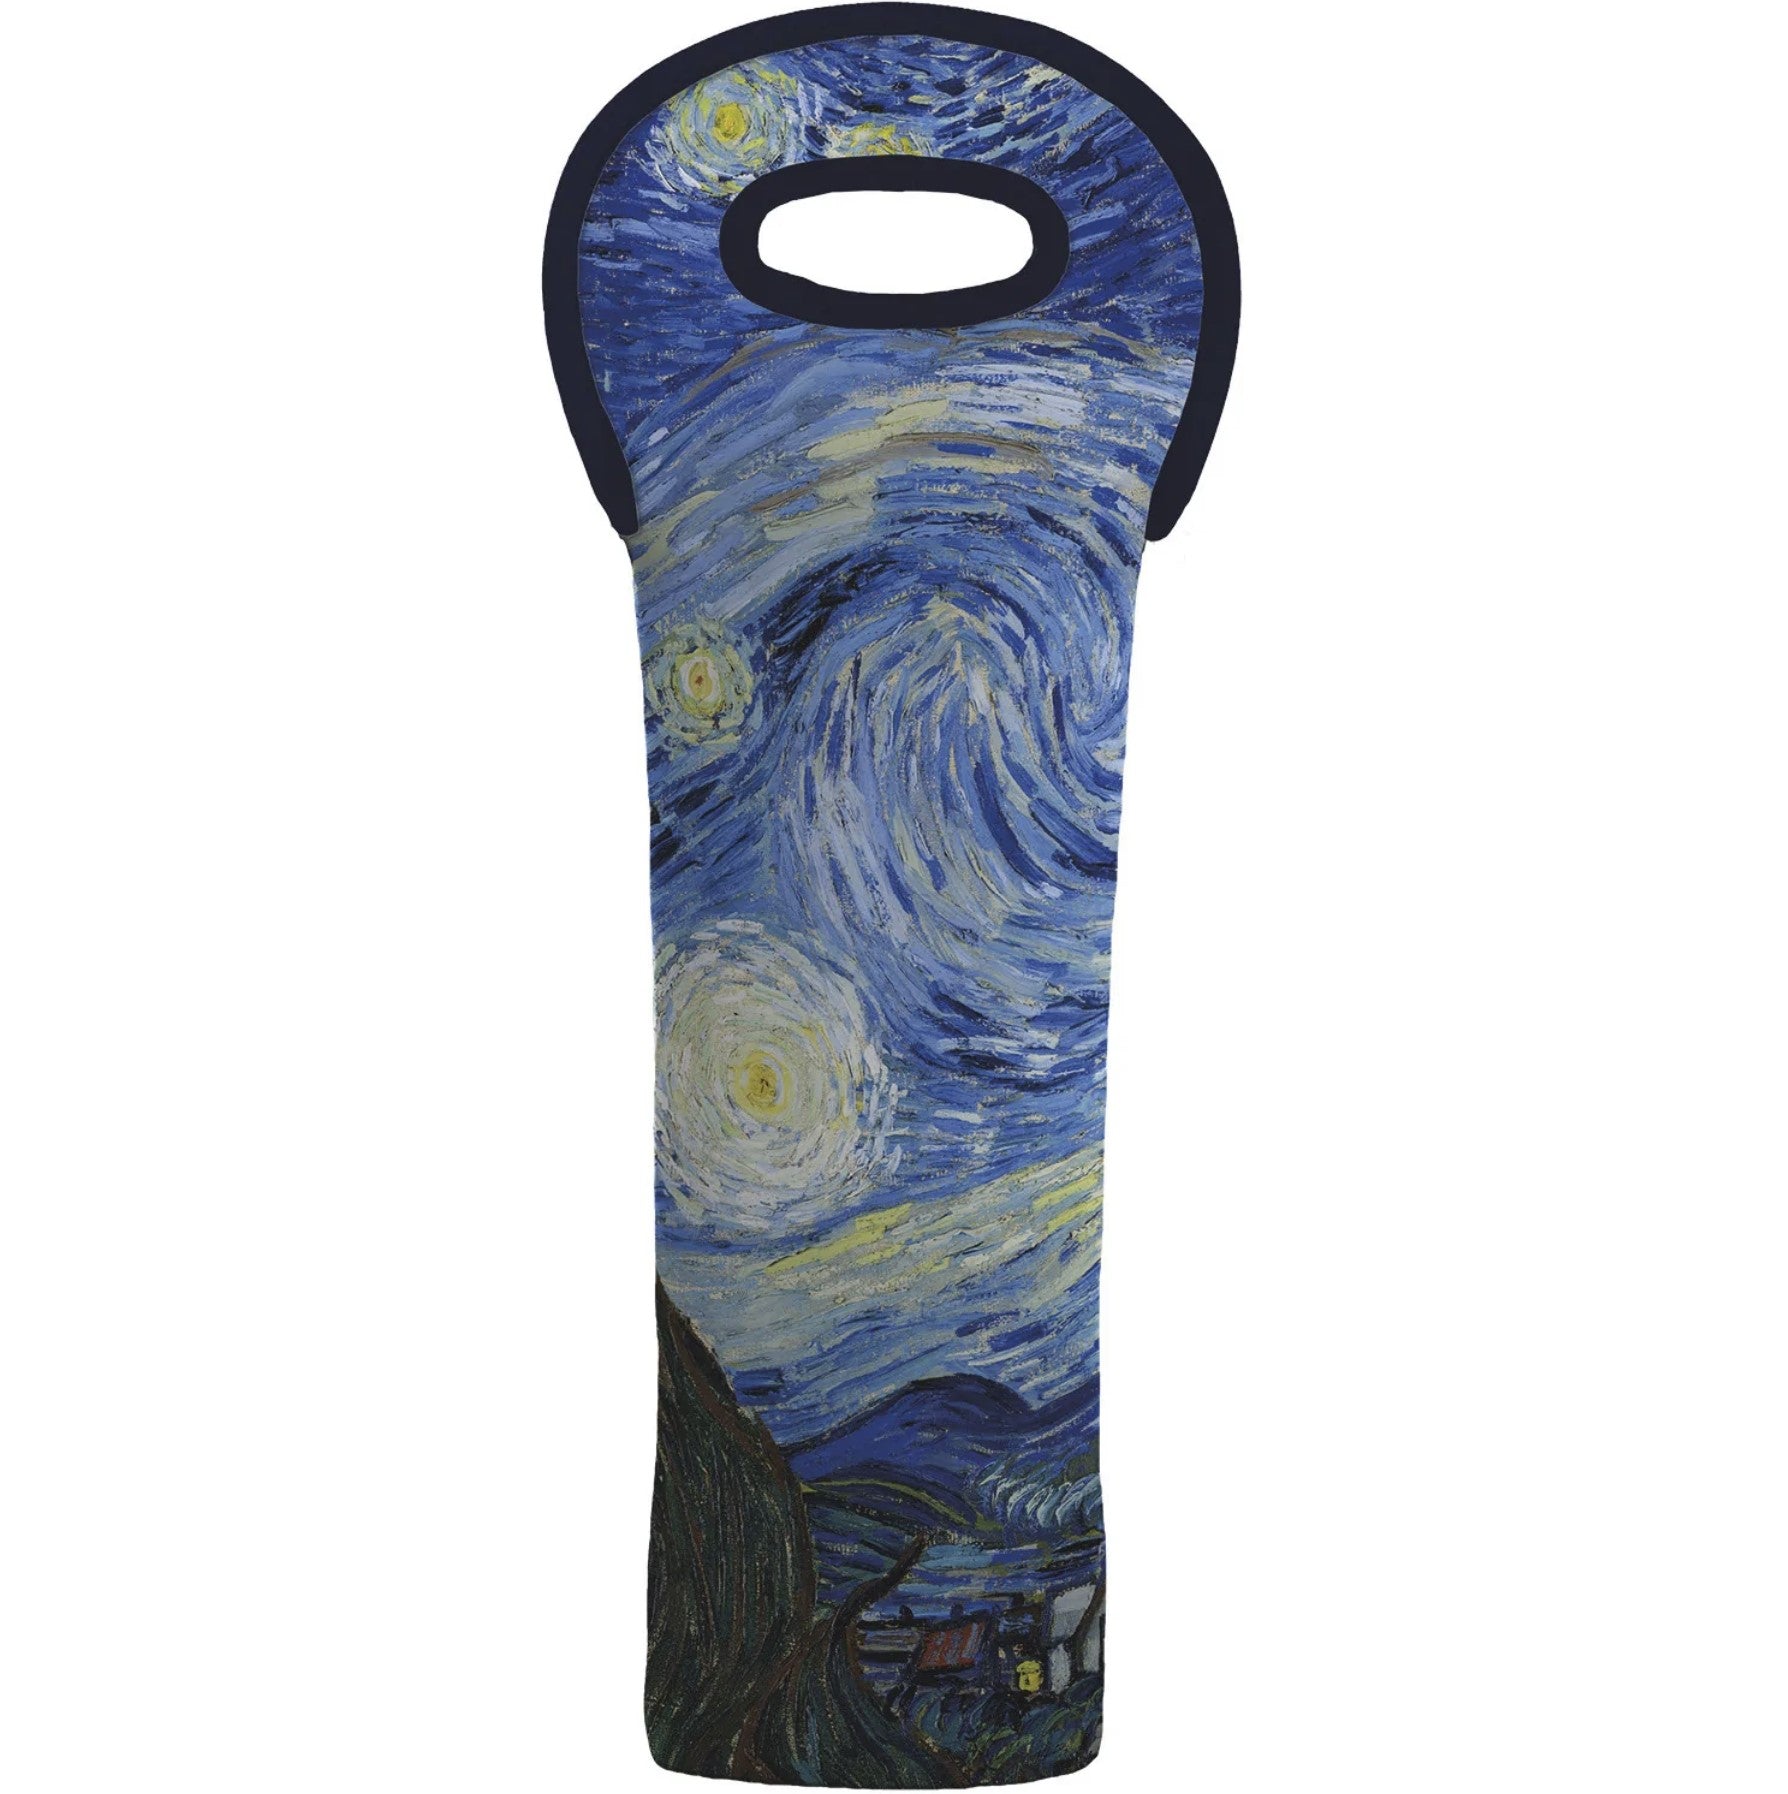 Single Wine Tote,    "Starry Night" by Vincent Van Gogh